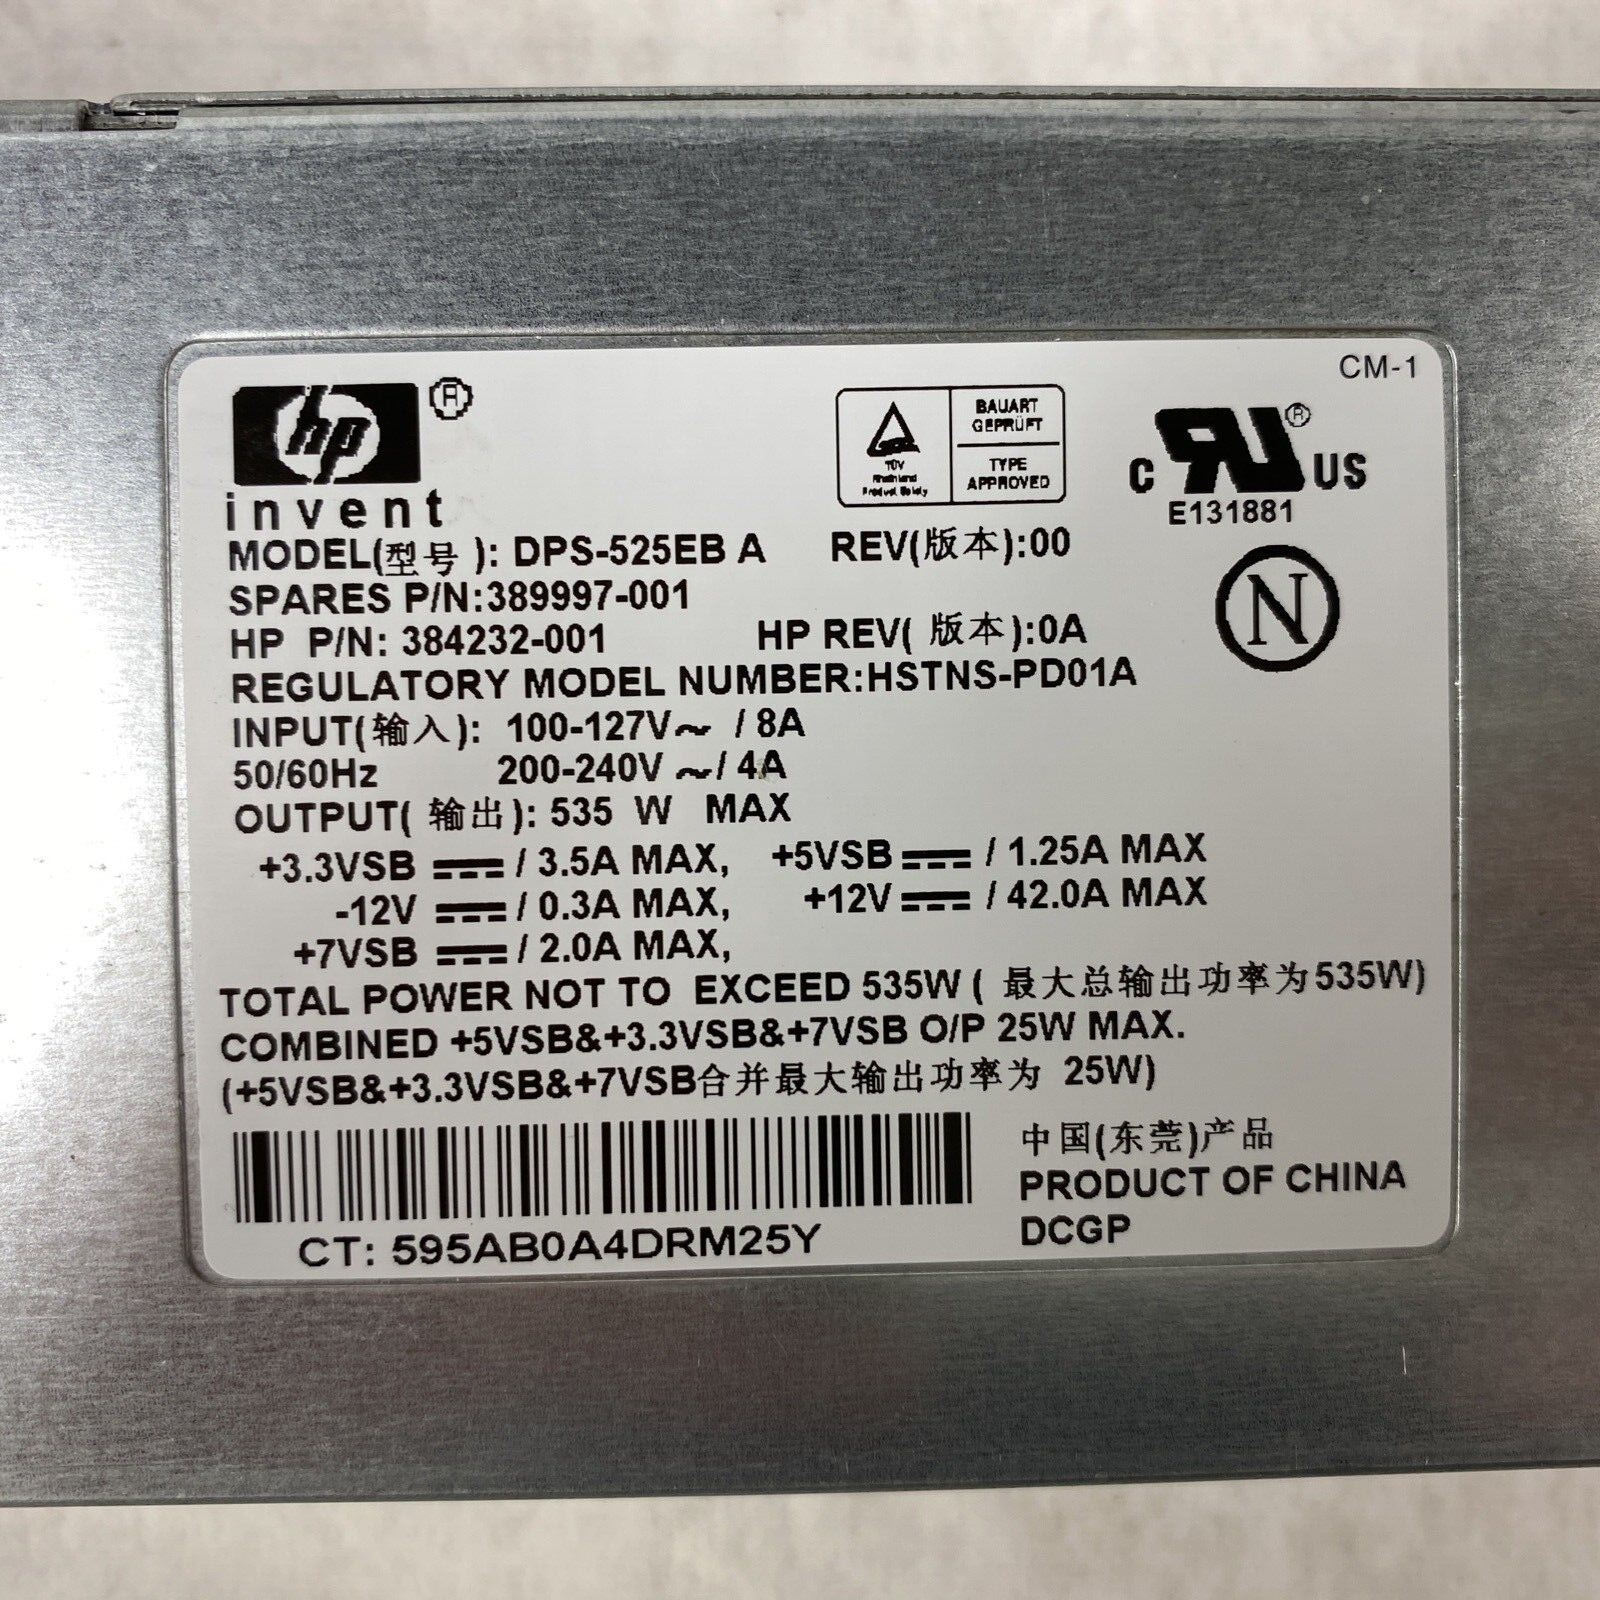 HP DPS-525EB A PSU Power Supply Proliant 389997-001 HSTNS-PD01A